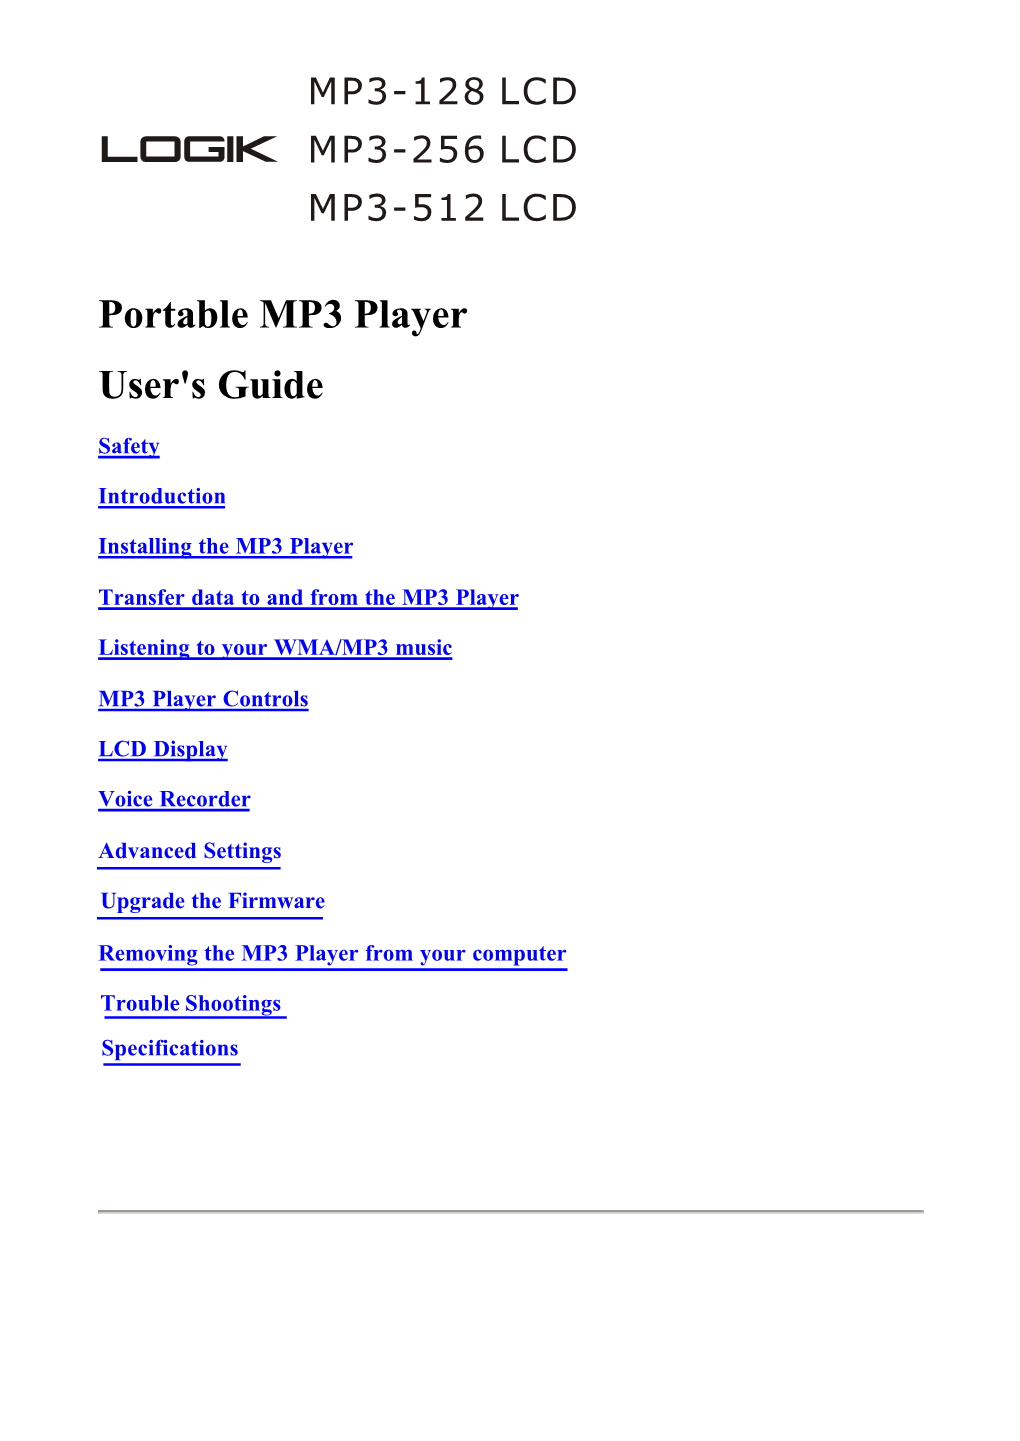 Portable MP3 Player User's Guide